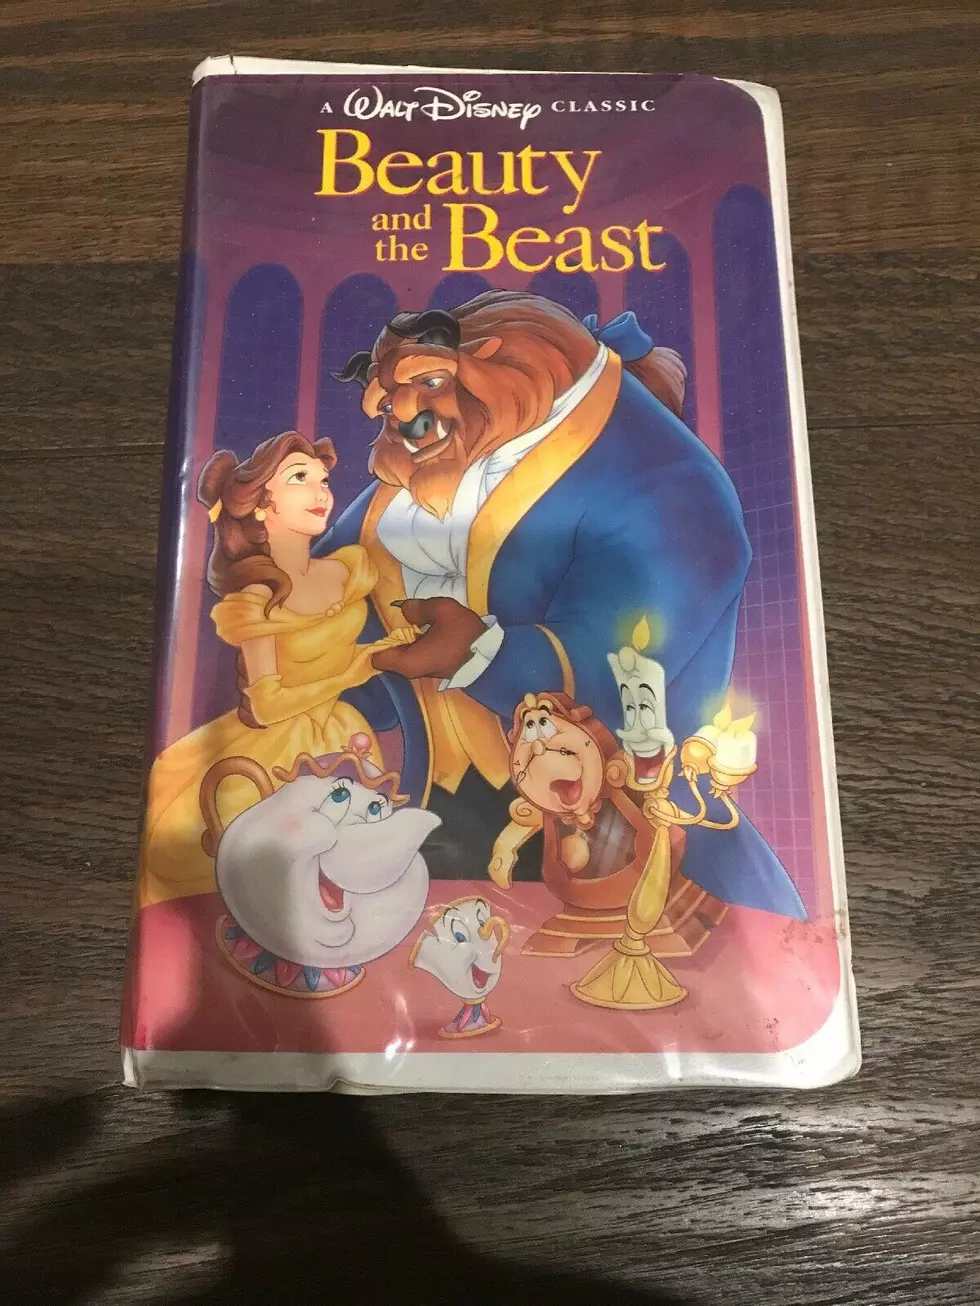 Look How Much People Are Trying to Sell These Disney VHS Tapes For